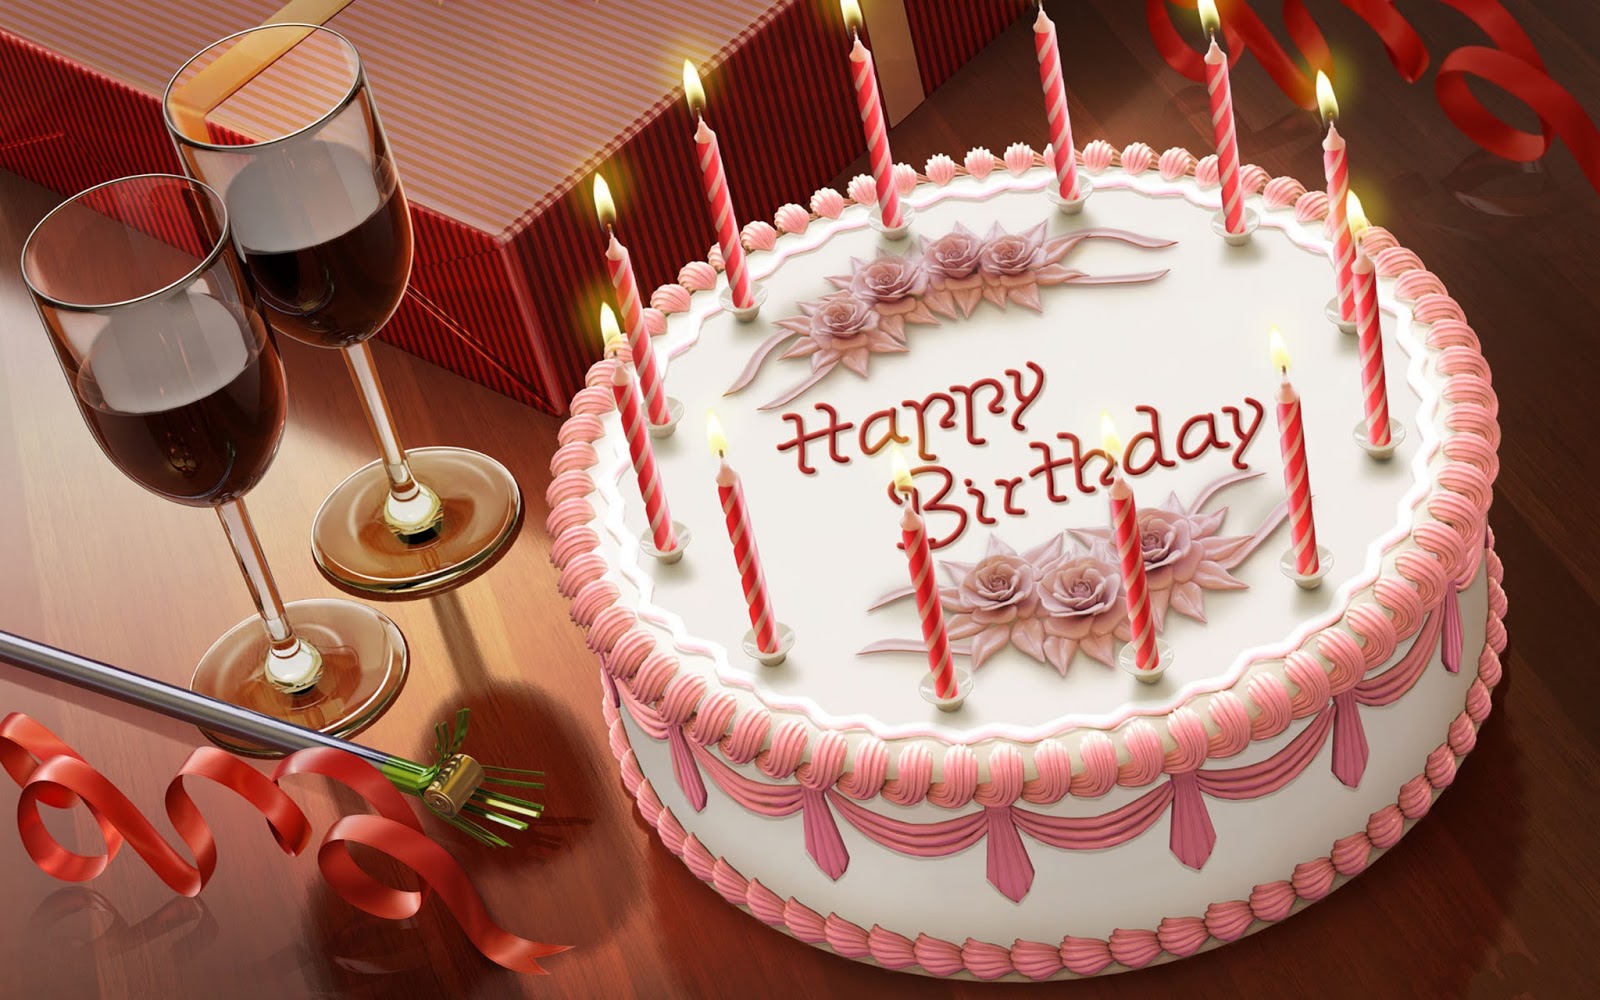 HD Wallpapers Fine: happy birthday girlfriend and wife wishes hd ...